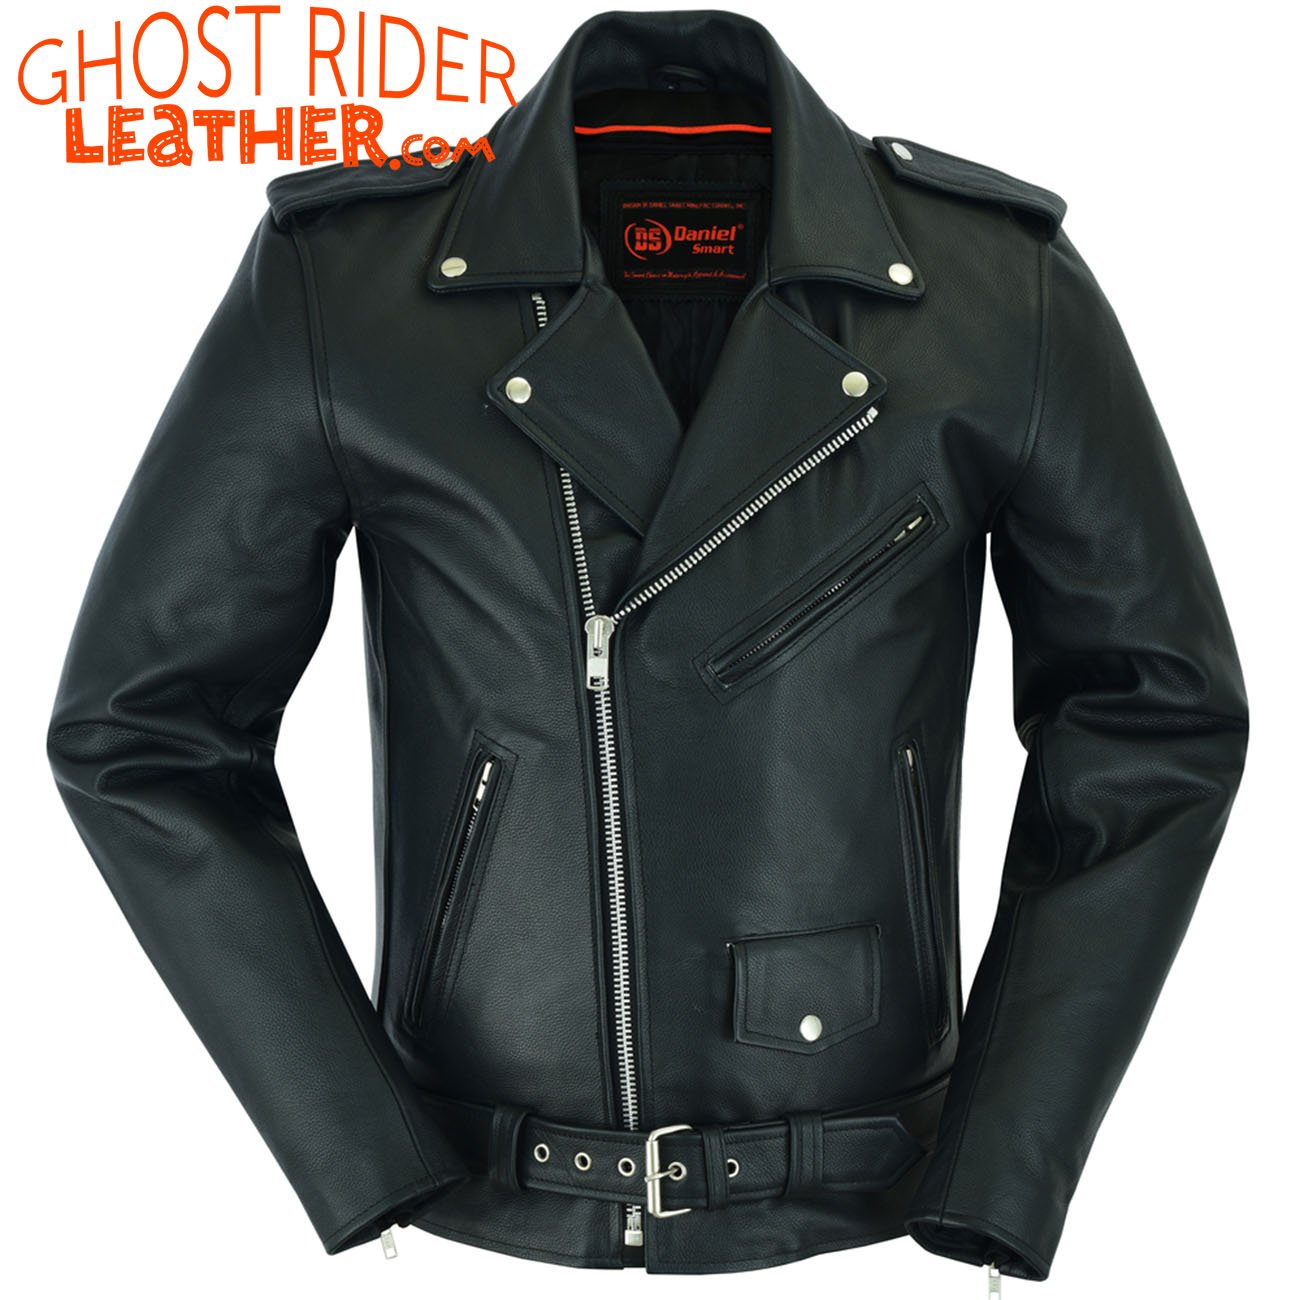 Leather Motorcycle Jacket - Men's - Police Style - Big and Tall - DS712TALL-DS